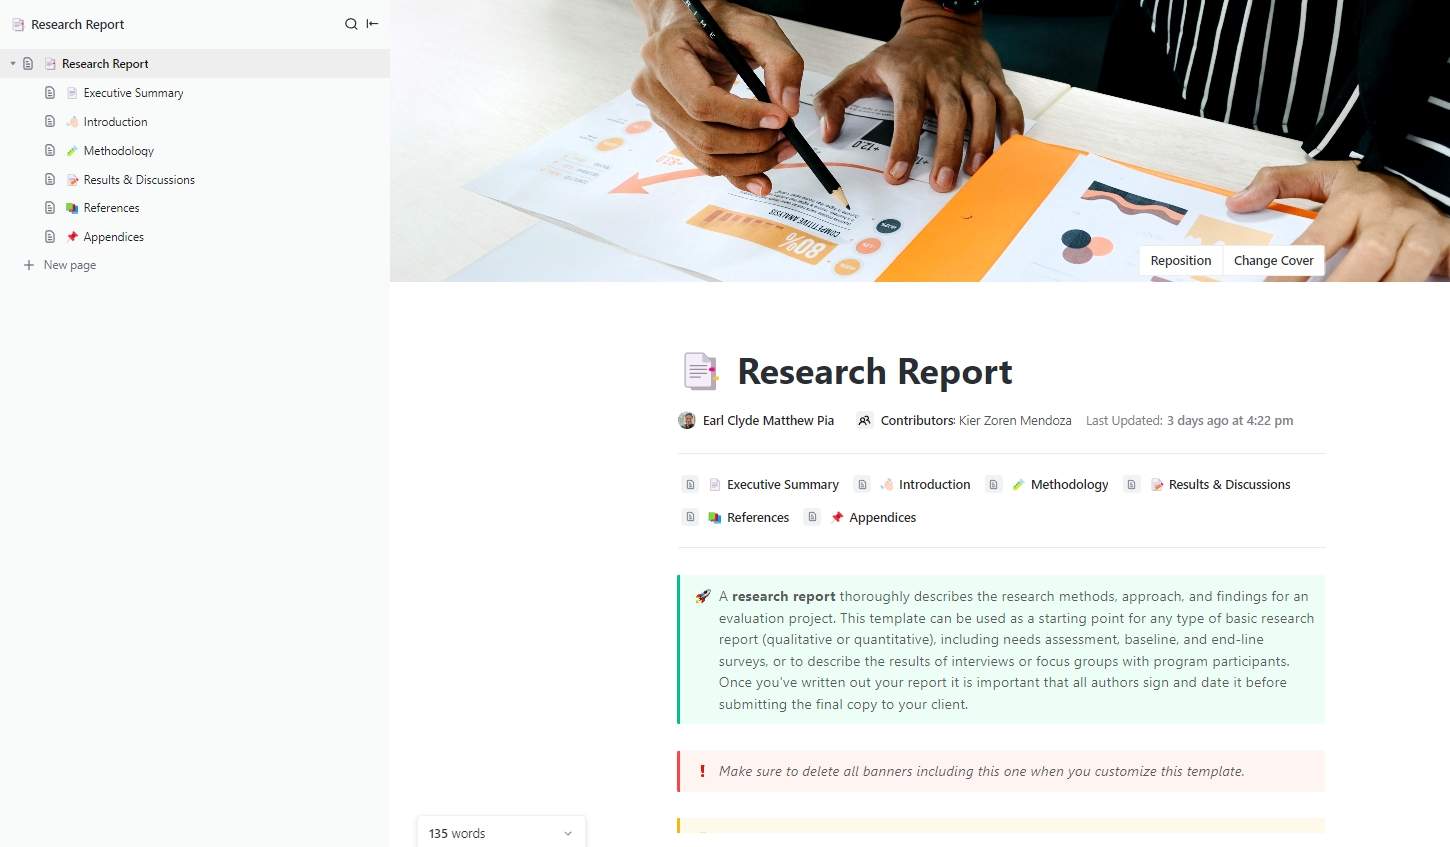 A research report thoroughly describes the research methods, approach, and findings for an evaluation project. This template can be used as a starting point for any type of basic research report (qualitative or quantitative), including needs assessment, baseline, and end-line surveys, or to describe the results of interviews or focus groups with program participants. Once you've written out your report it is important that all authors sign and date it before submitting the final copy to your client.